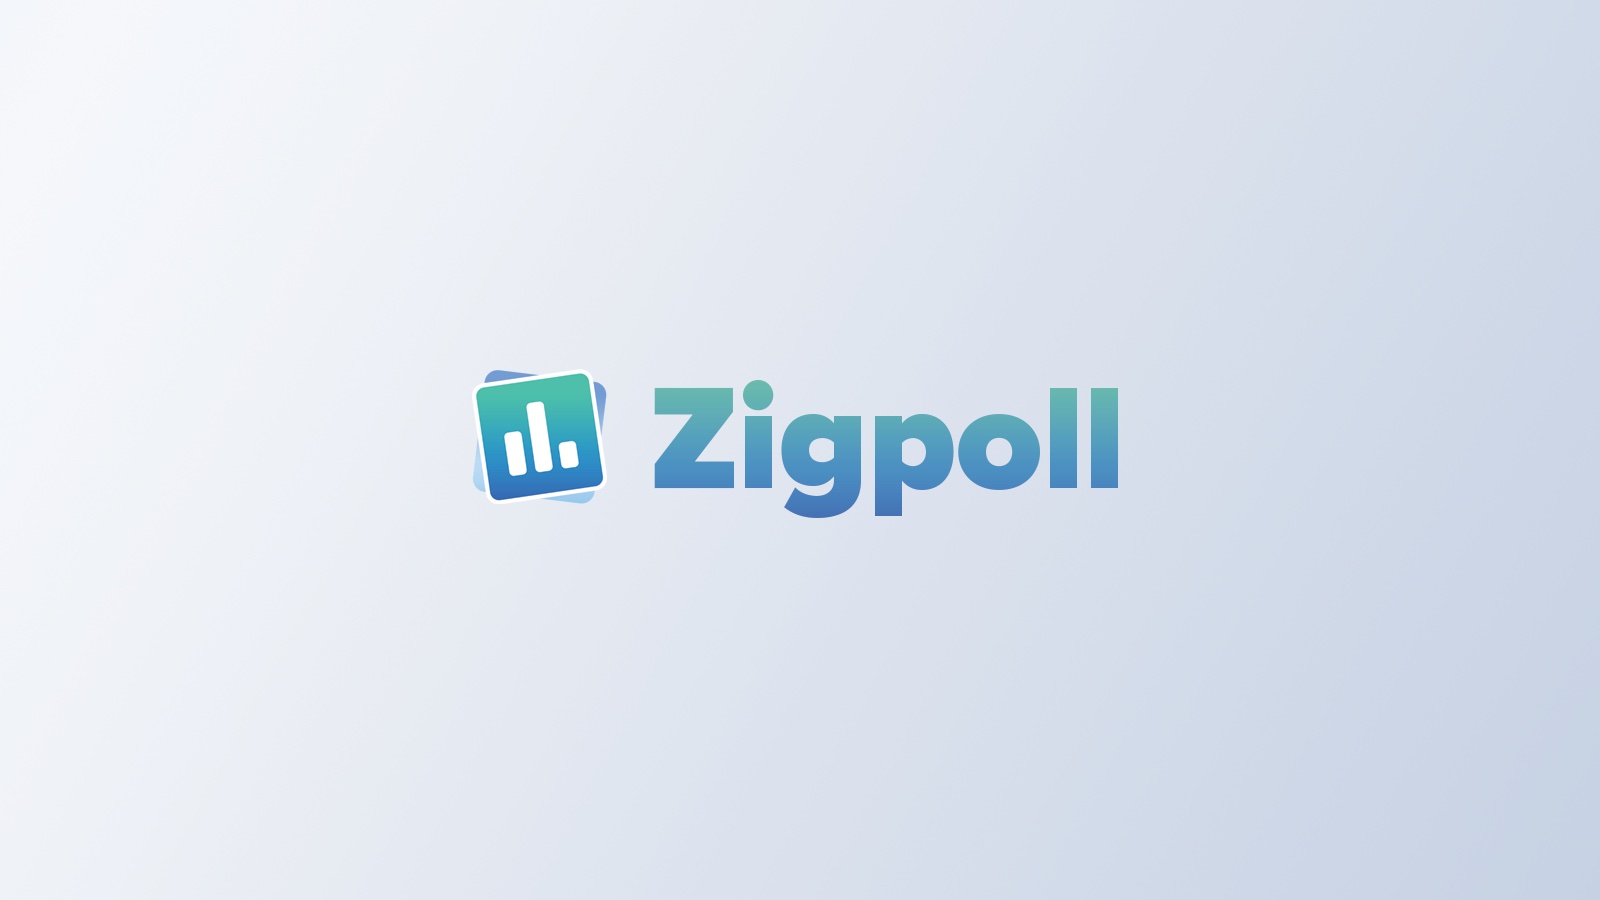 Zigpoll - A tool for businesses to capture customer insights with targeted surveys and analysis